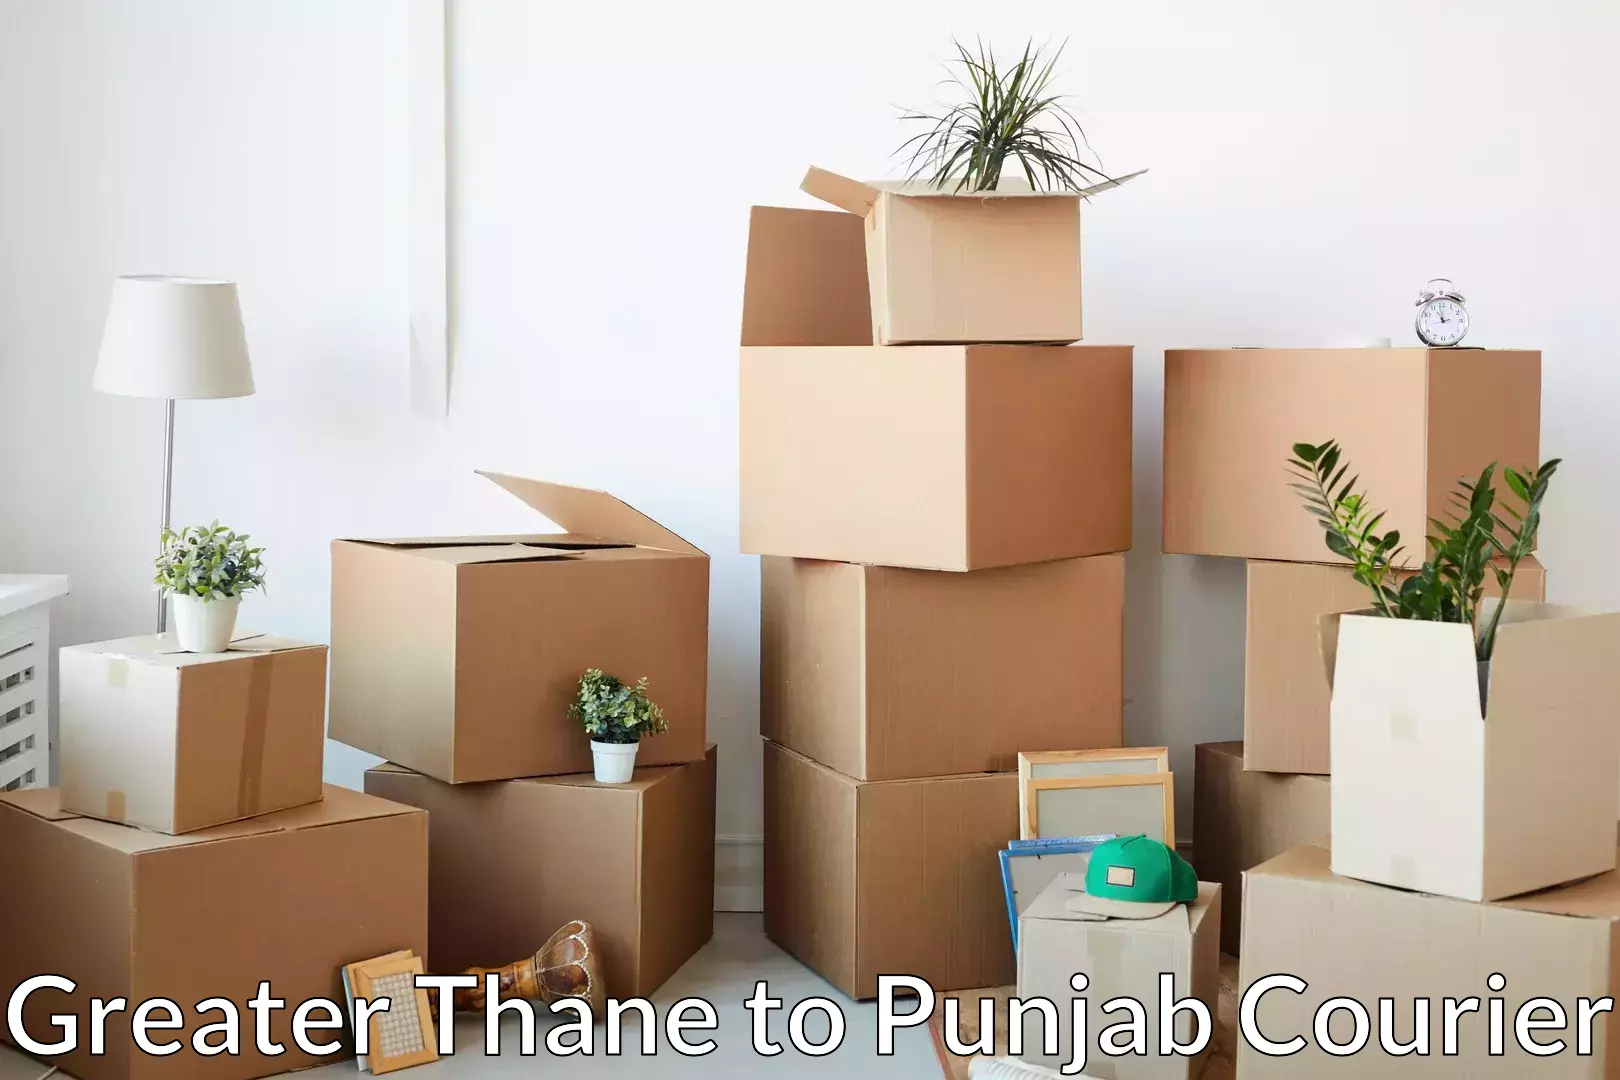 Professional moving company Greater Thane to Firozpur